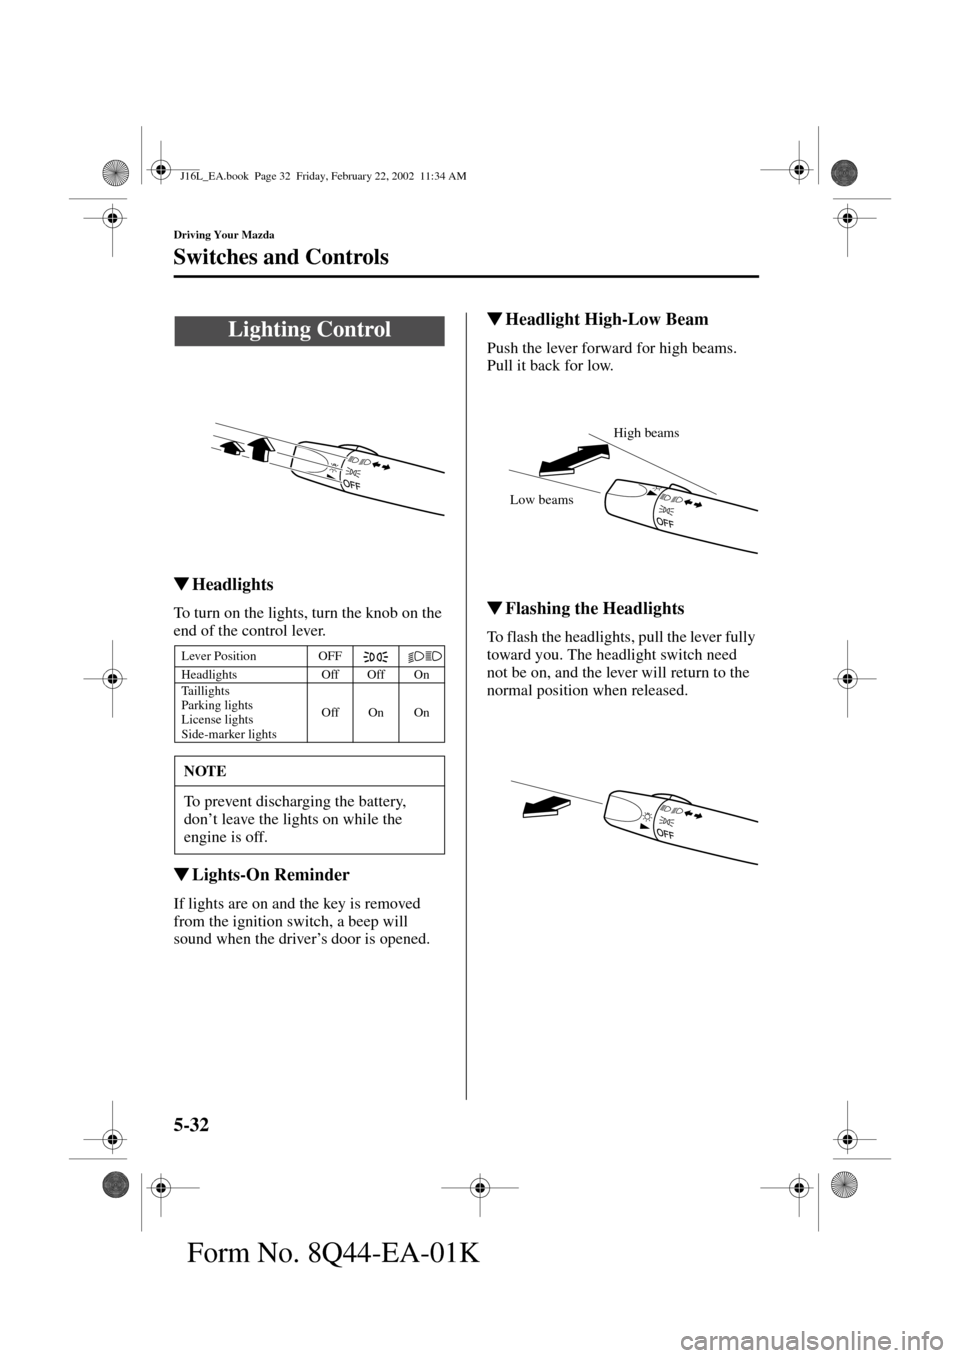 MAZDA MODEL MPV 2002  Owners Manual (in English) 5-32
Driving Your Mazda
Form No. 8Q44-EA-01K
Switches and Controls
Headlights
To turn on the lights, turn the knob on the 
end of the control lever.
Lights-On Reminder
If lights are on and the key i